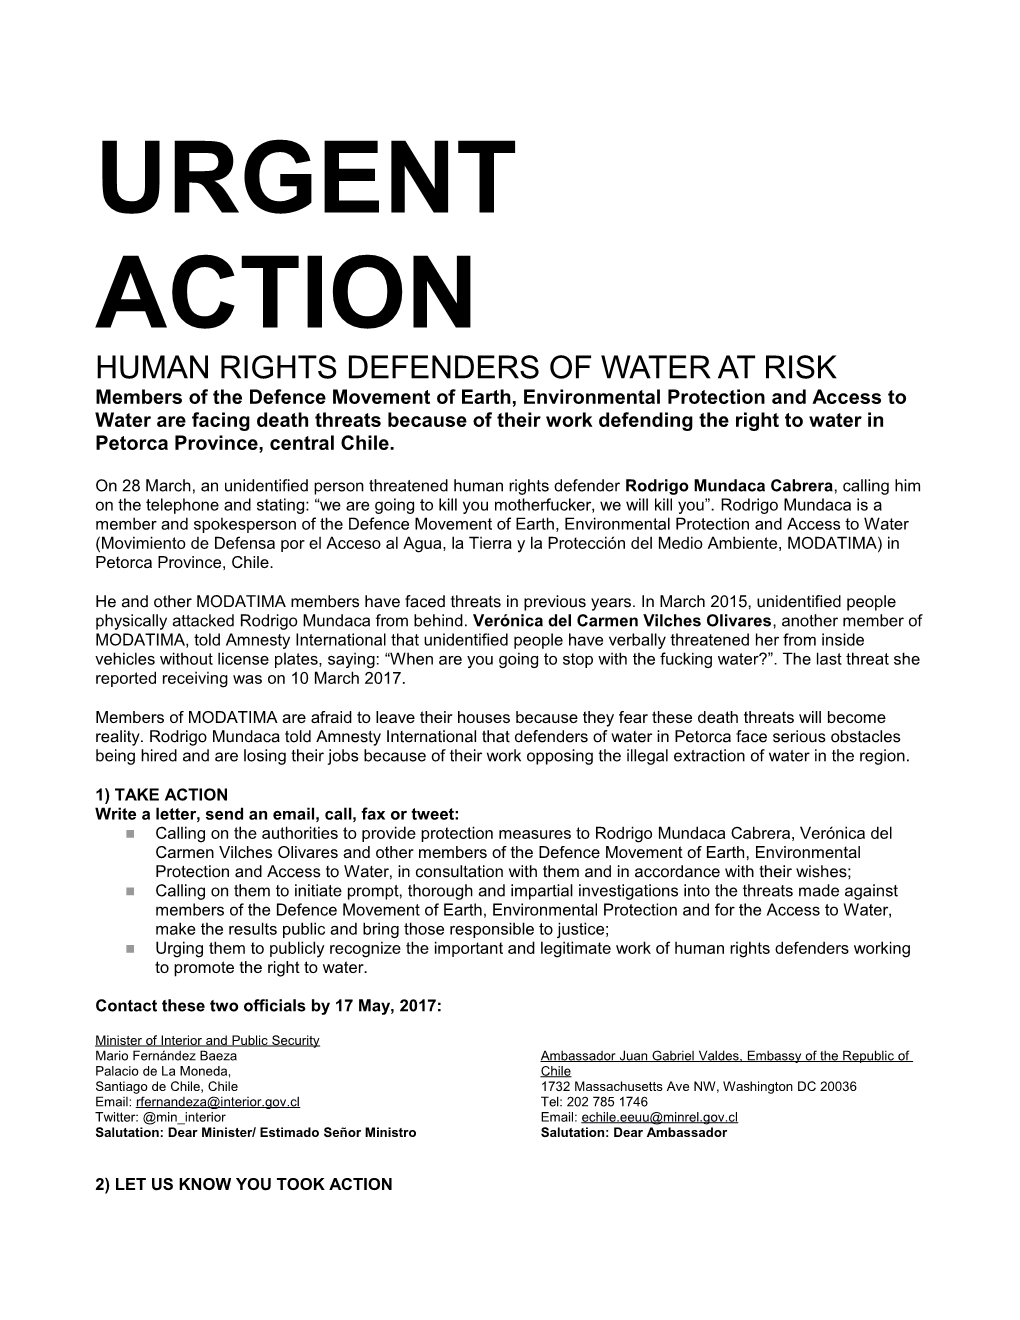 Human Rights Defenders of Water at Risk